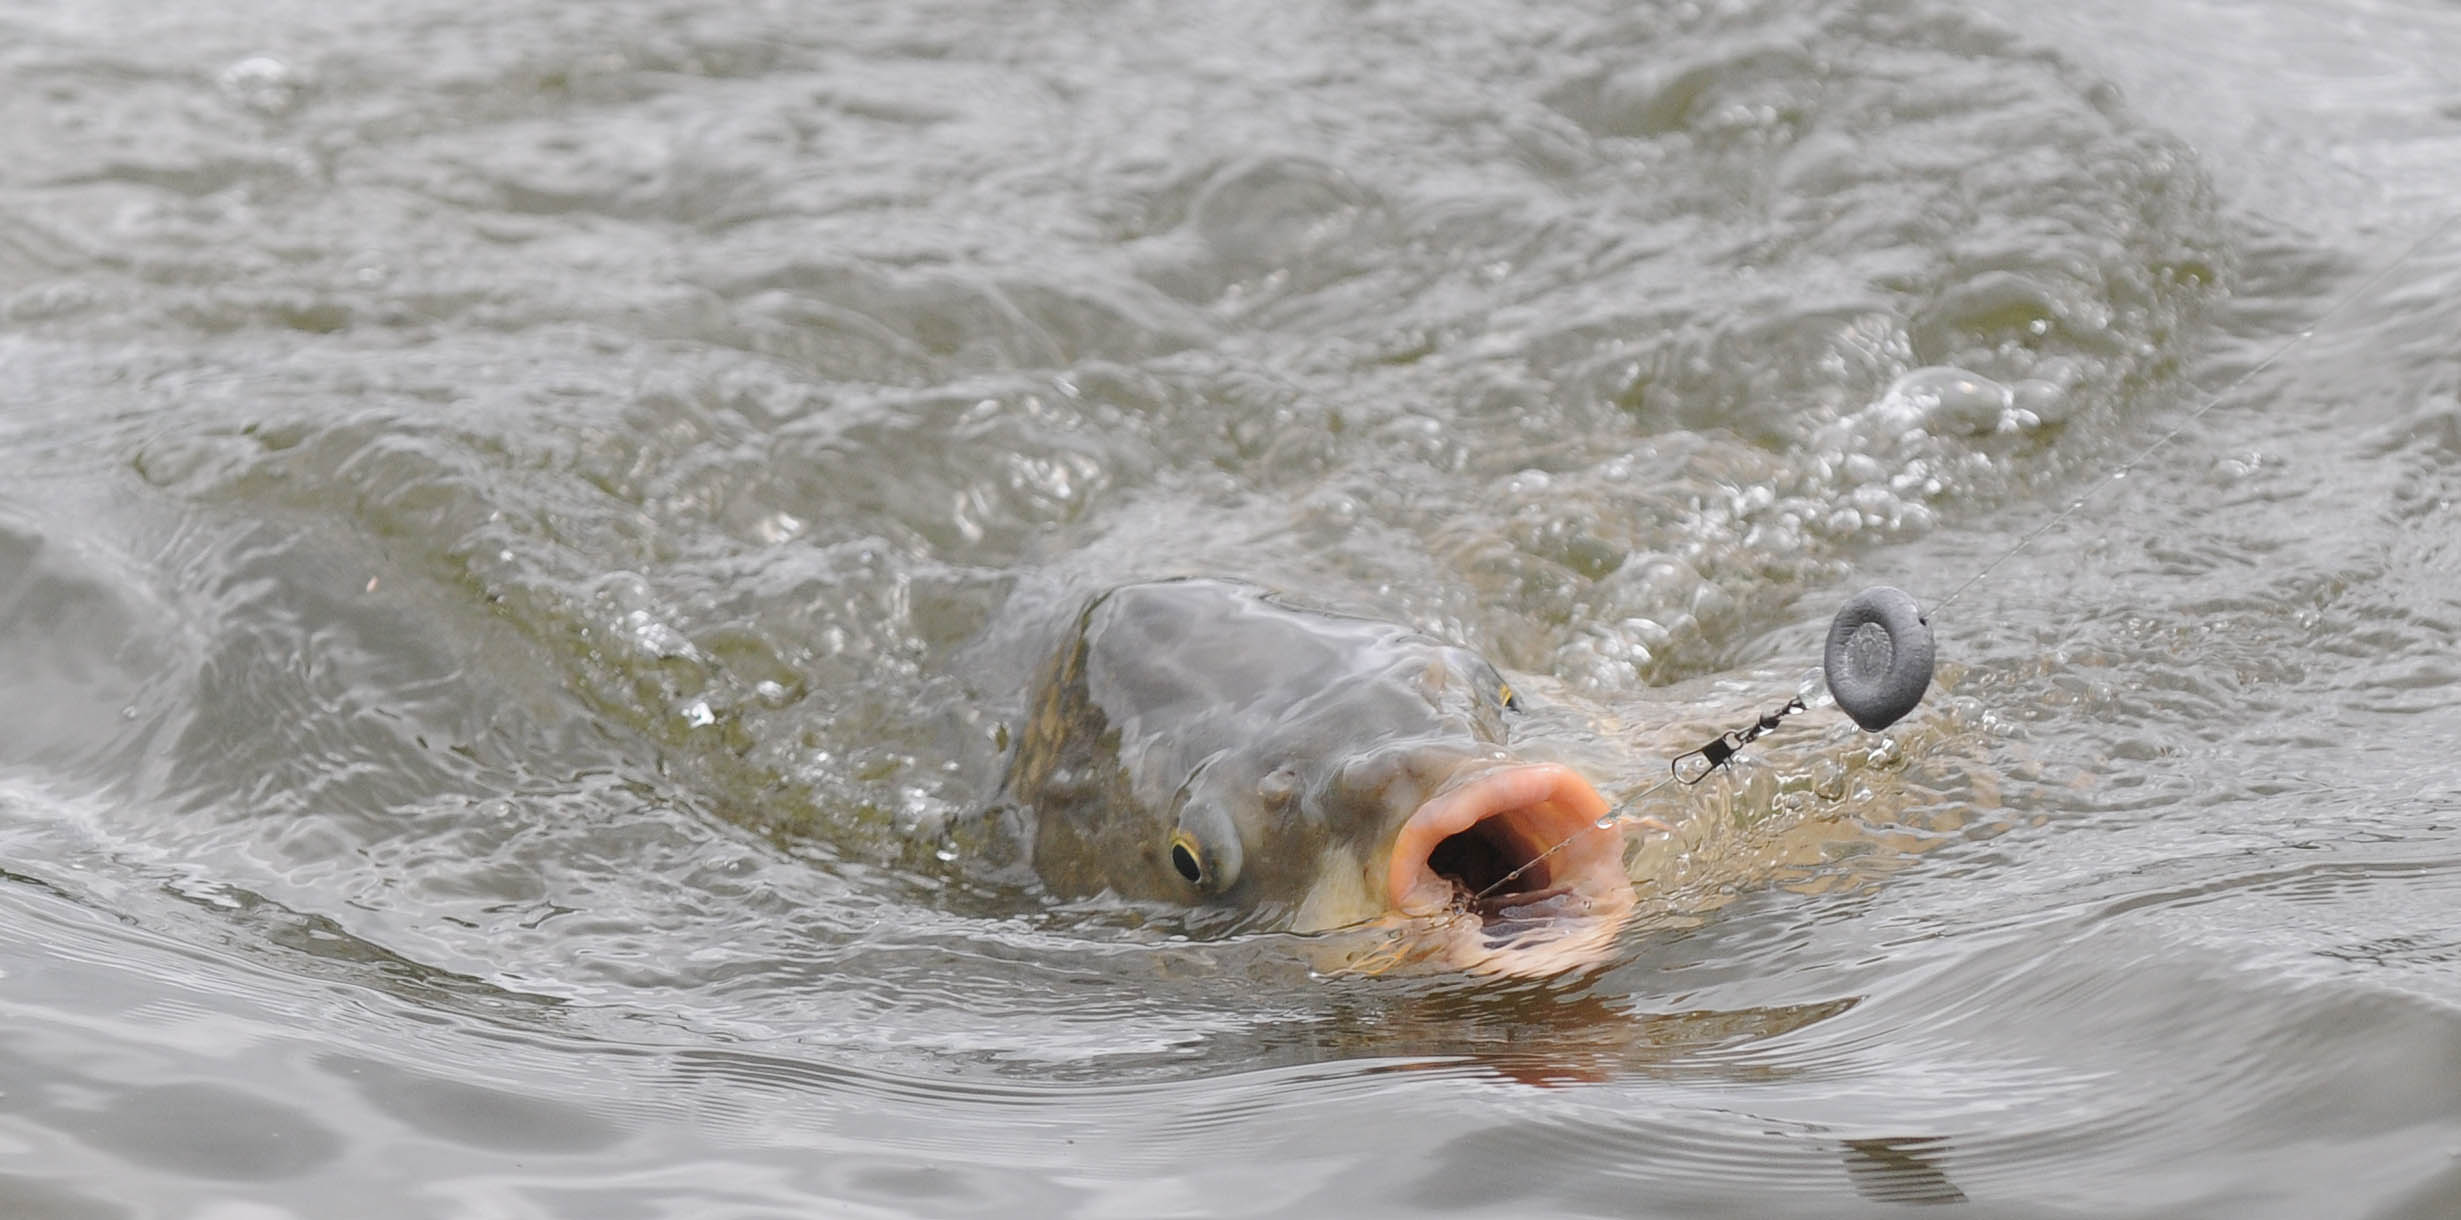 Year of the Carp: Finding Fish in Dirty Water 